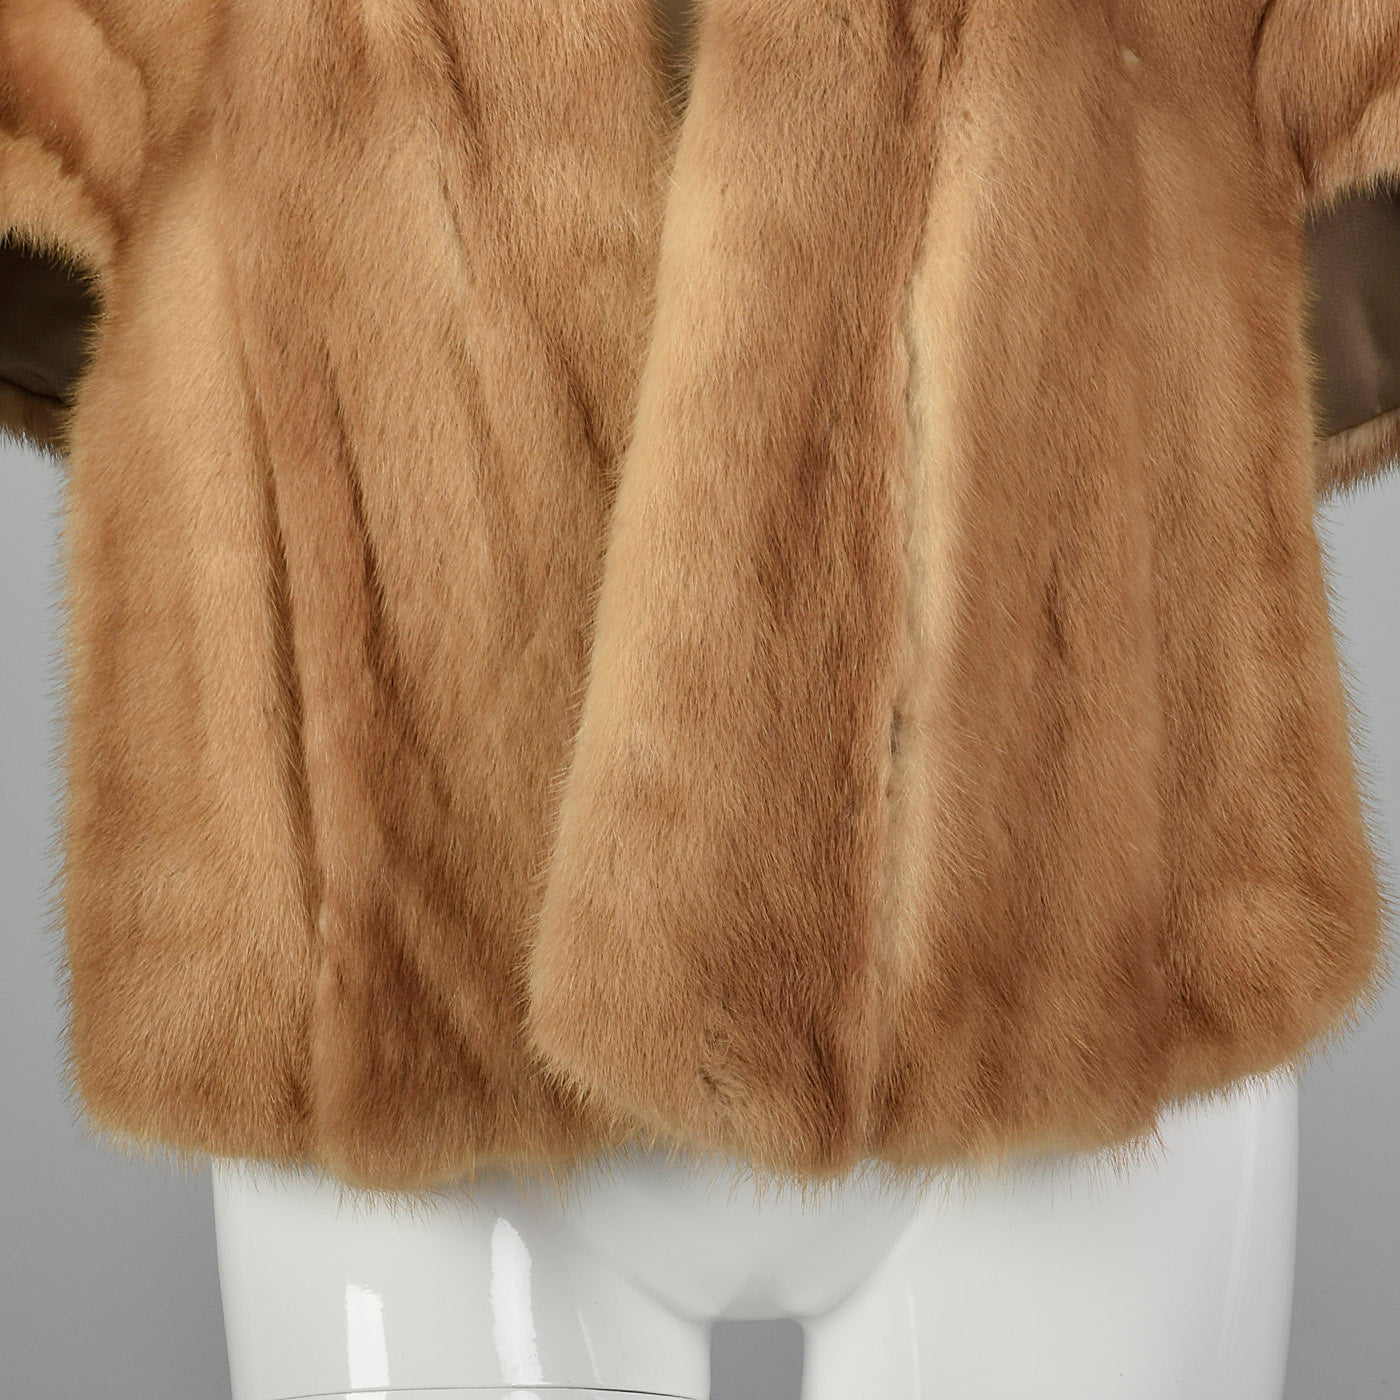 1950s Mink Stole with Pockets